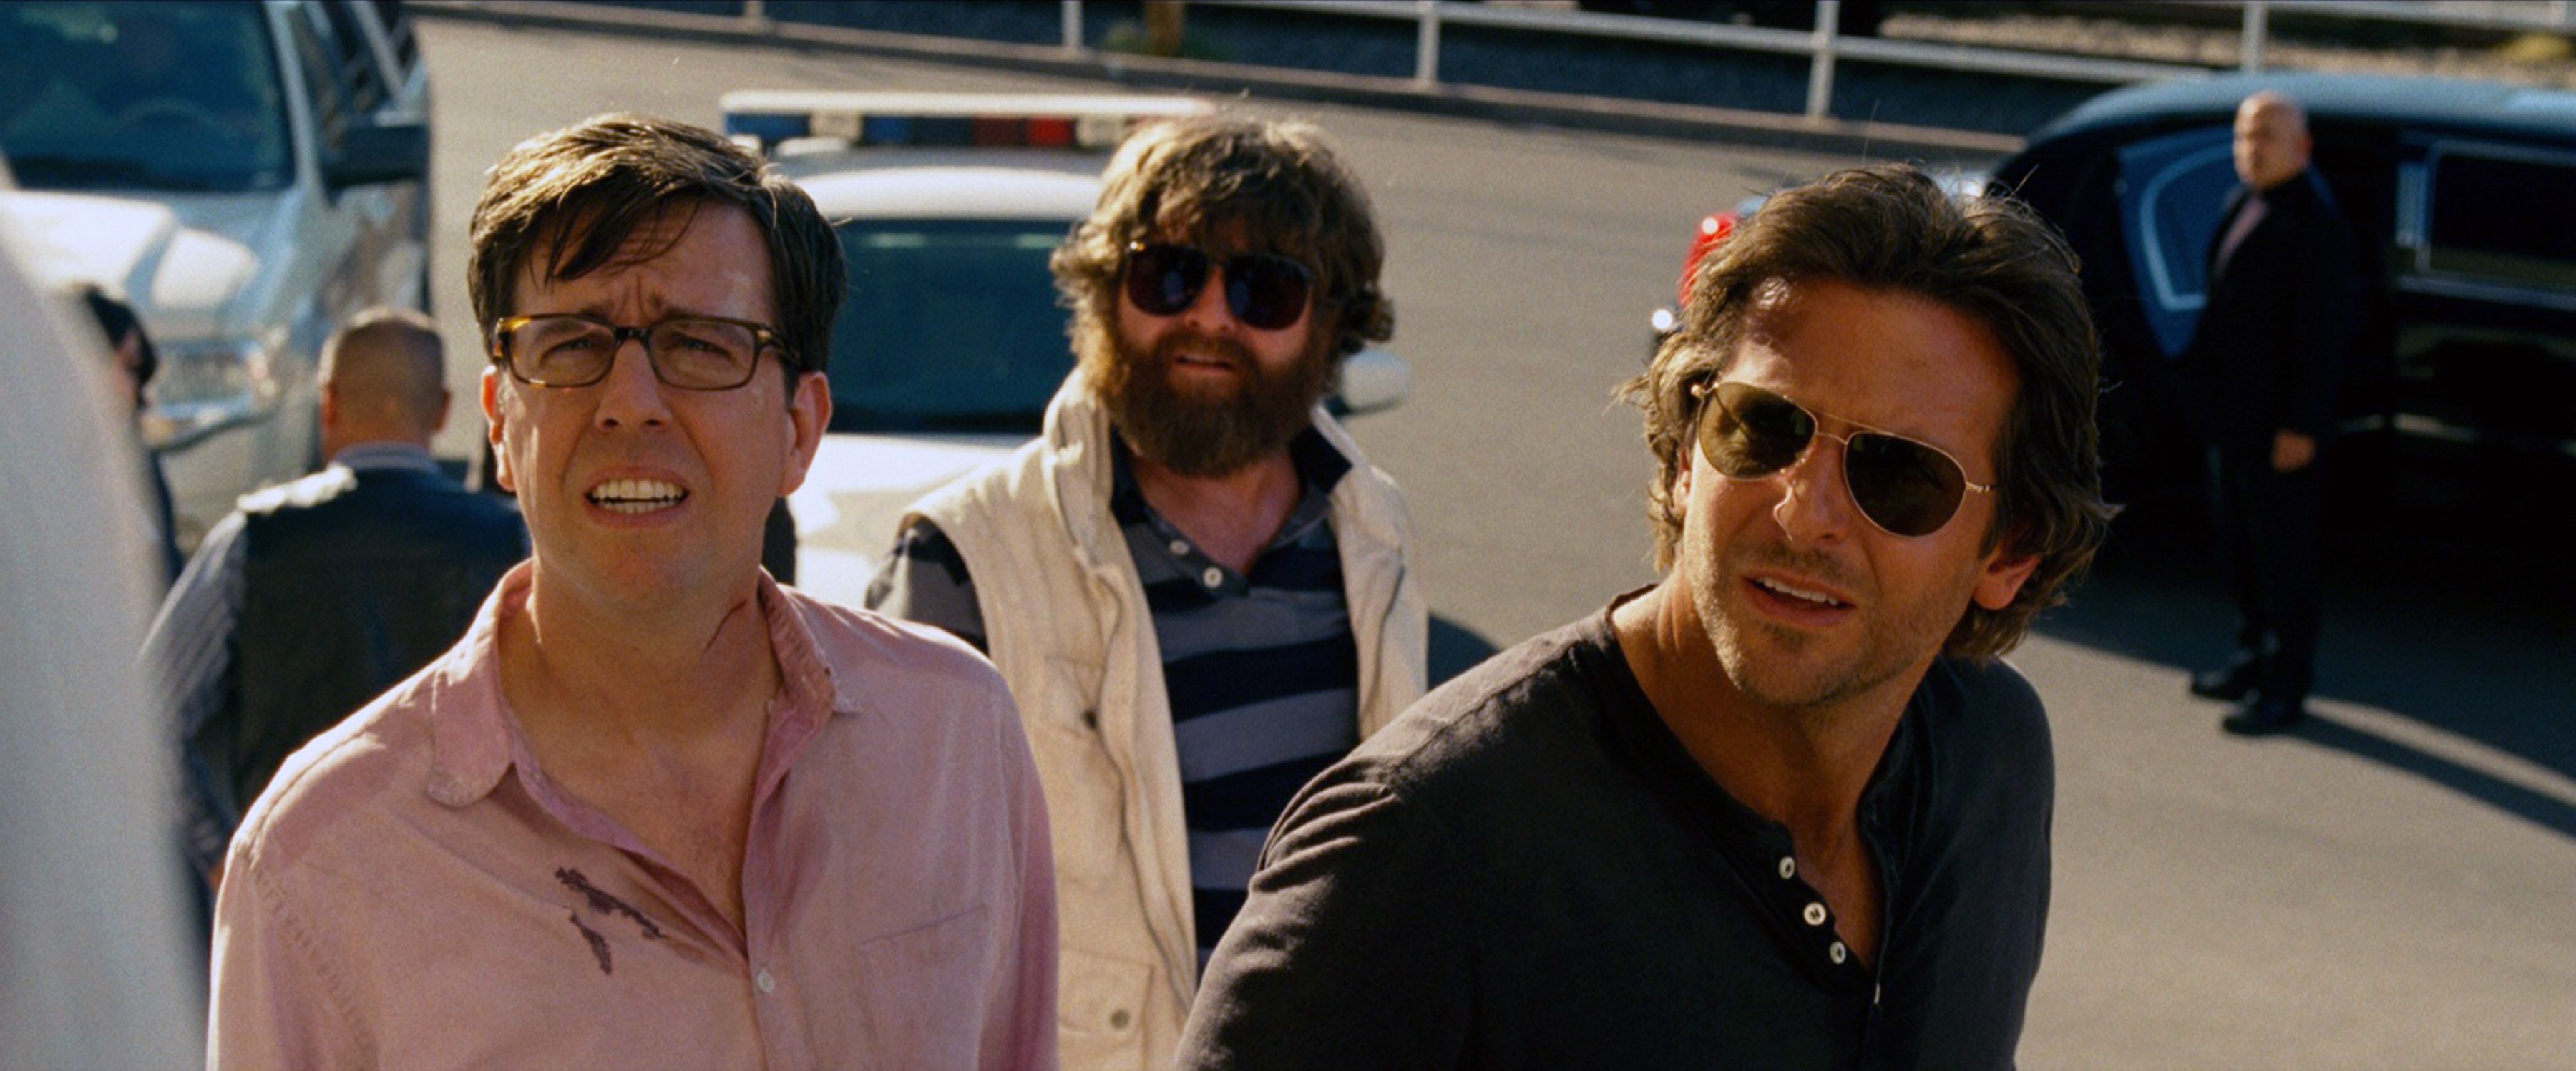 Alan Stu and Phil in The Hangover Part III 3